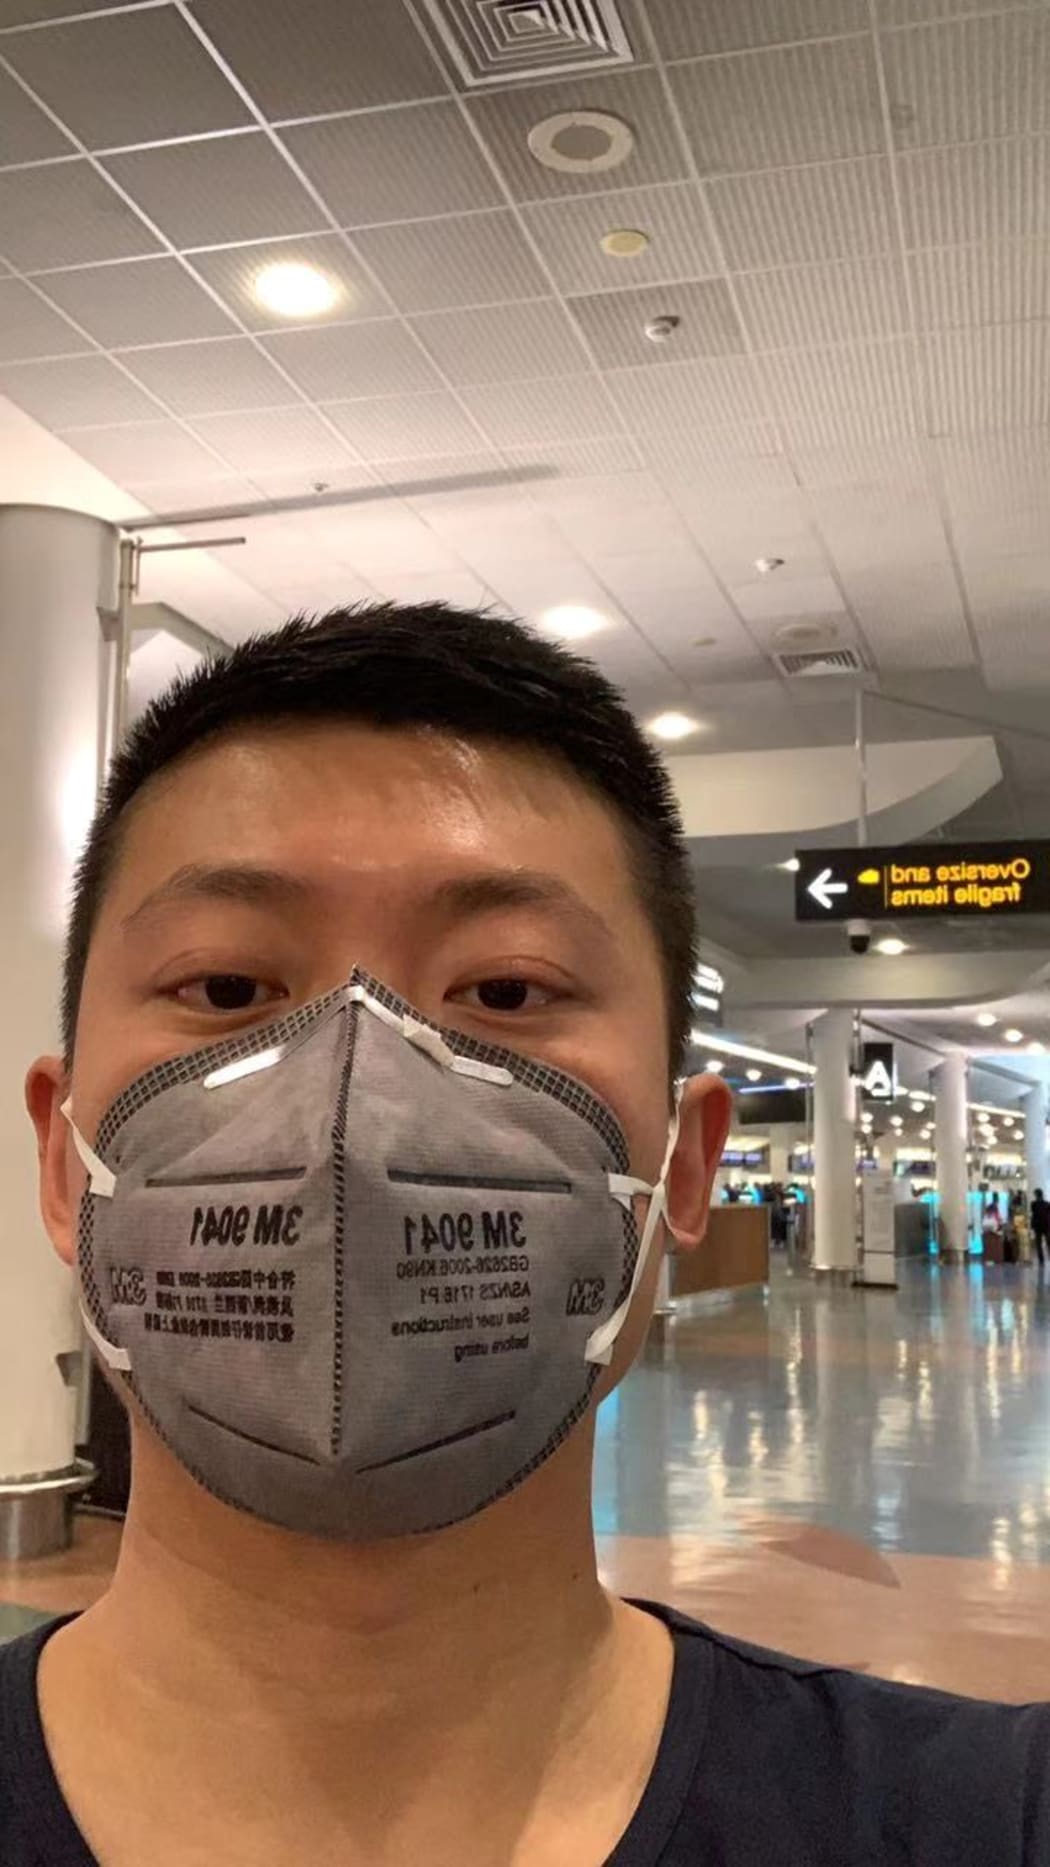 Thomas Wang says the government should do more to help those who are in self-quarantine.